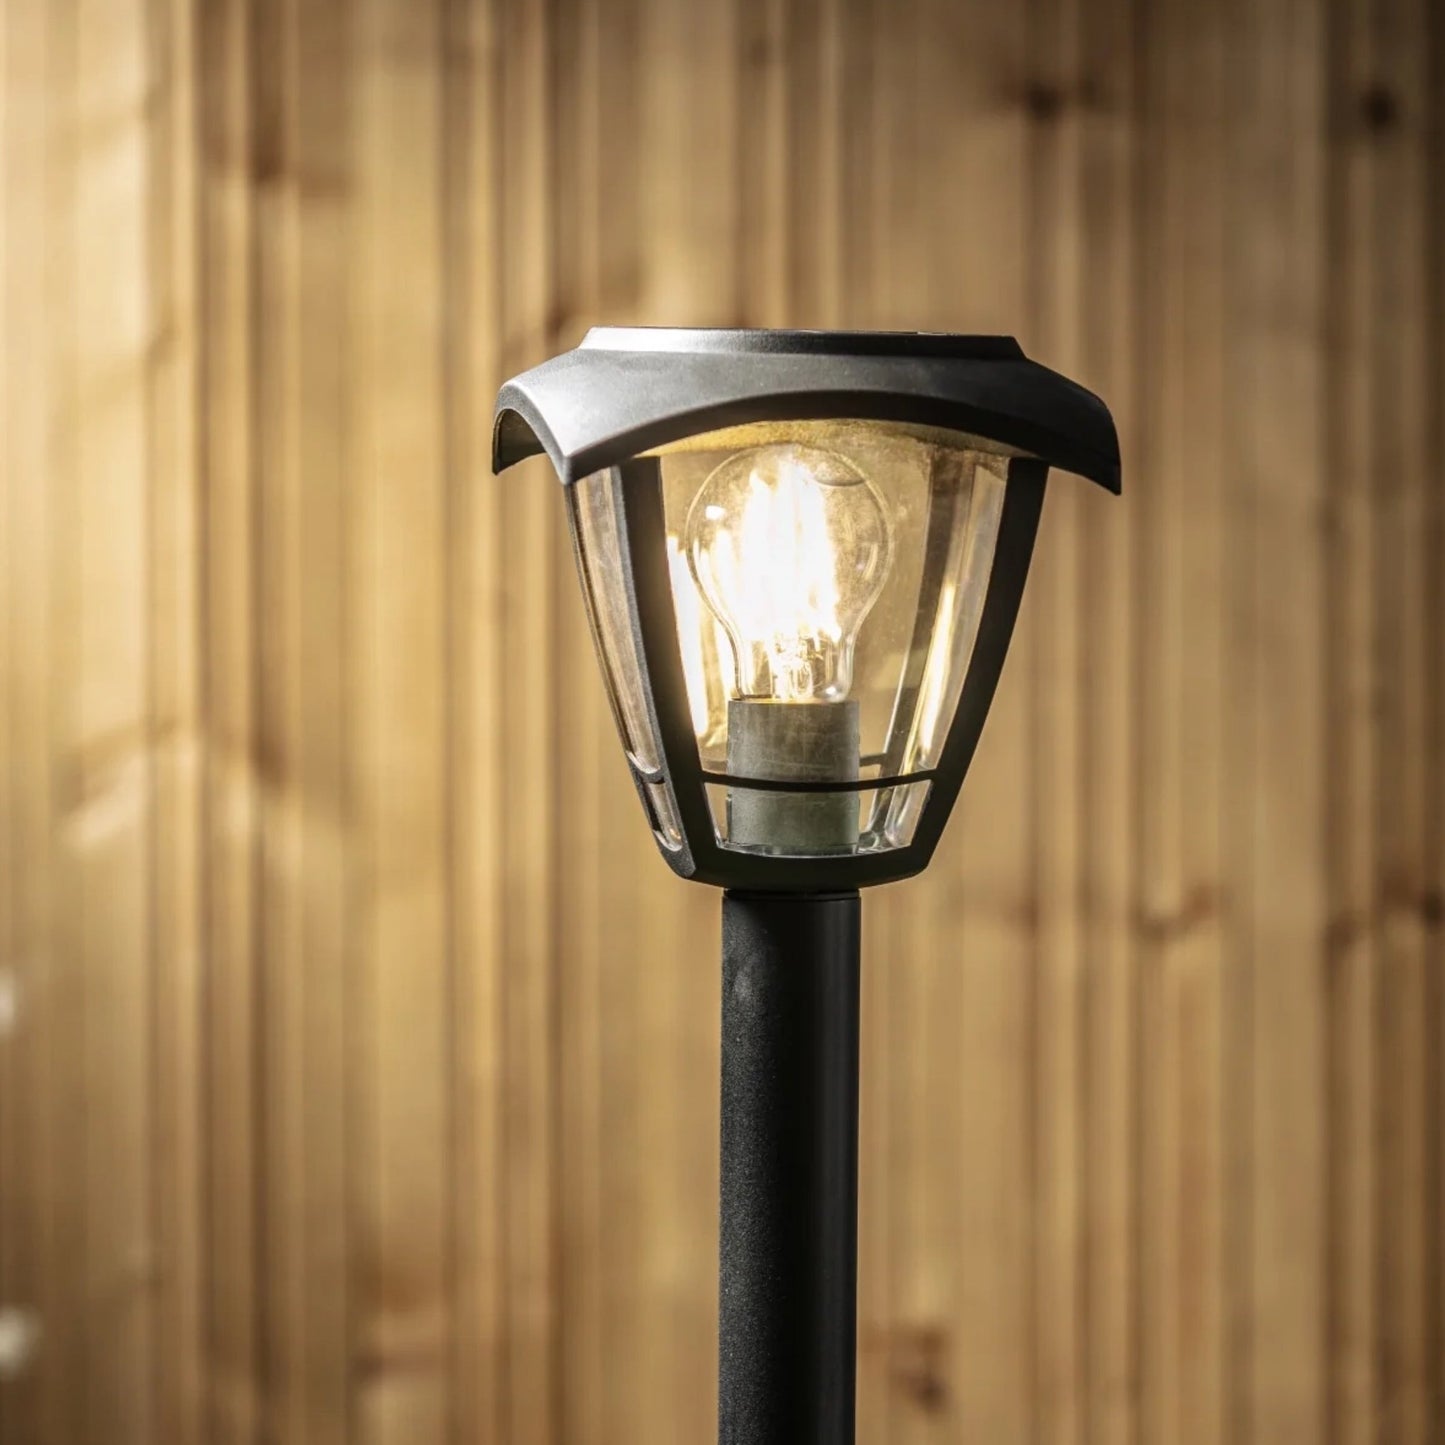 Our Lara black solar outdoor post light would look perfect in a modern or more traditional home design. Outside post lights can provide atmospheric light in your garden, at the front door or on the terrace as well as a great security solution. It is designed for durability and longevity with its robust polycarbonate material producing a fully weatherproof and water resistant light.